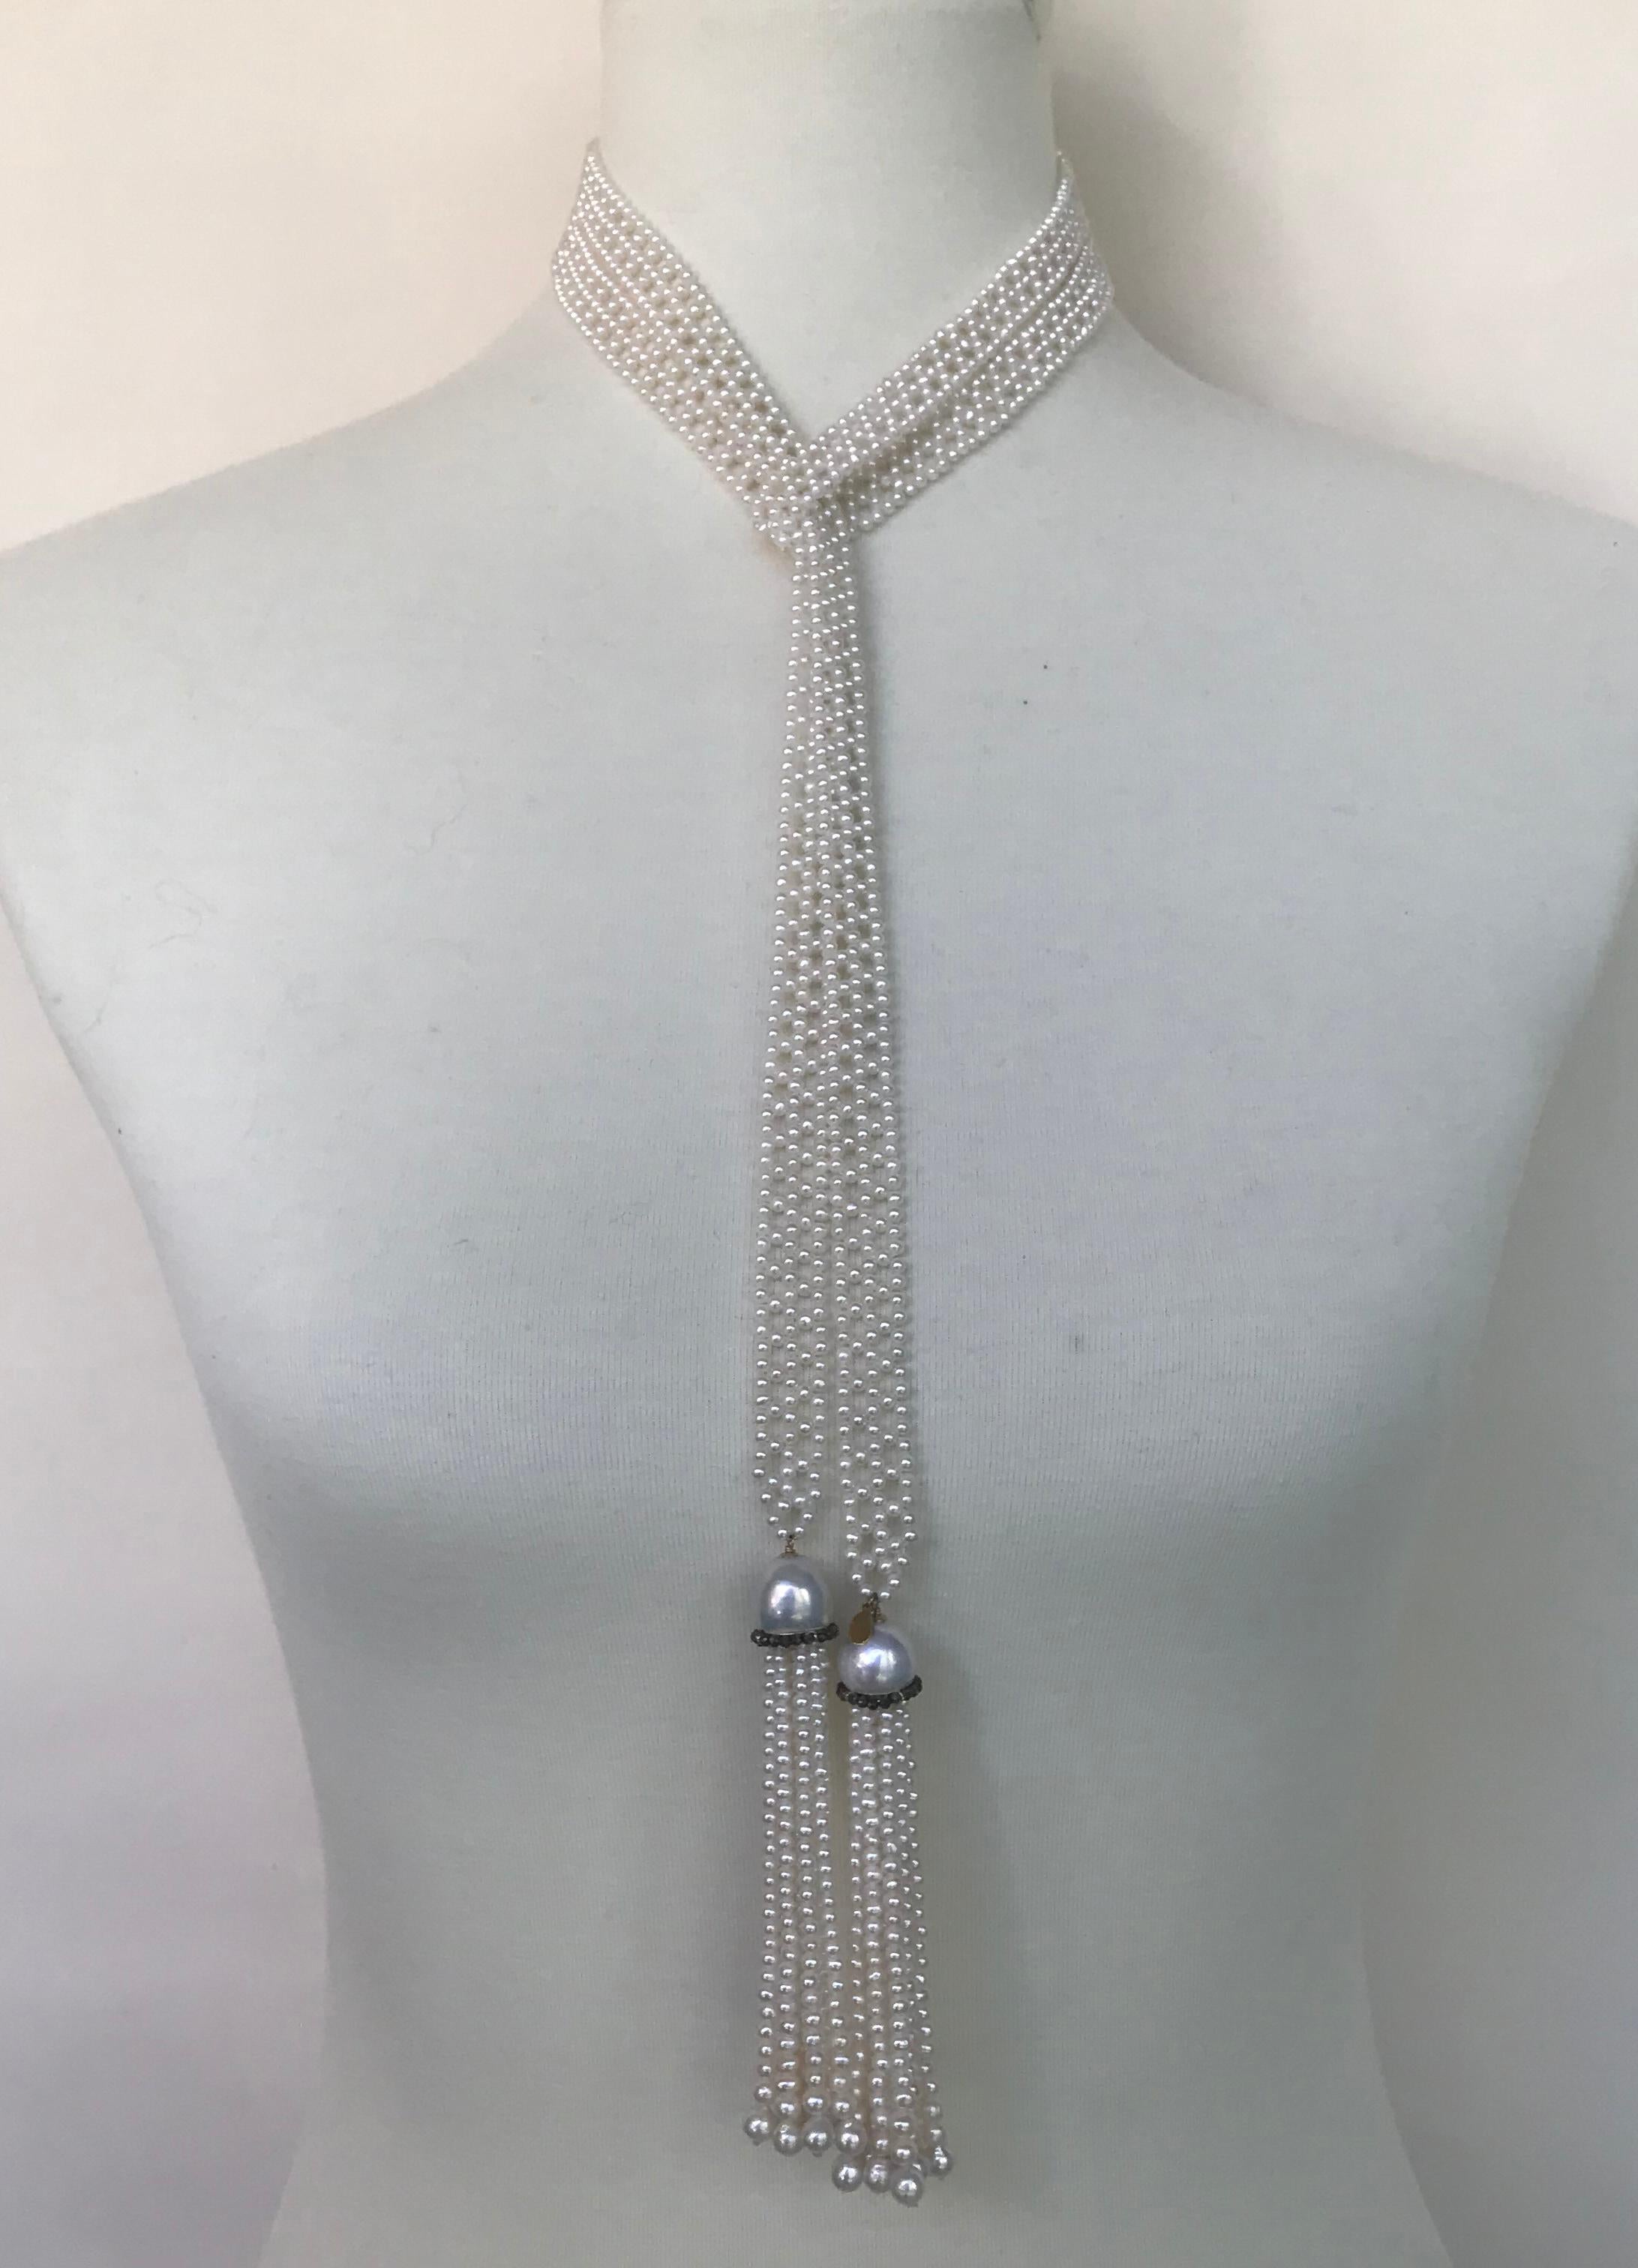 Artist Marina J. Woven White Pearl Sautoir Necklace with Black Spinel & 14k Yellow Gold